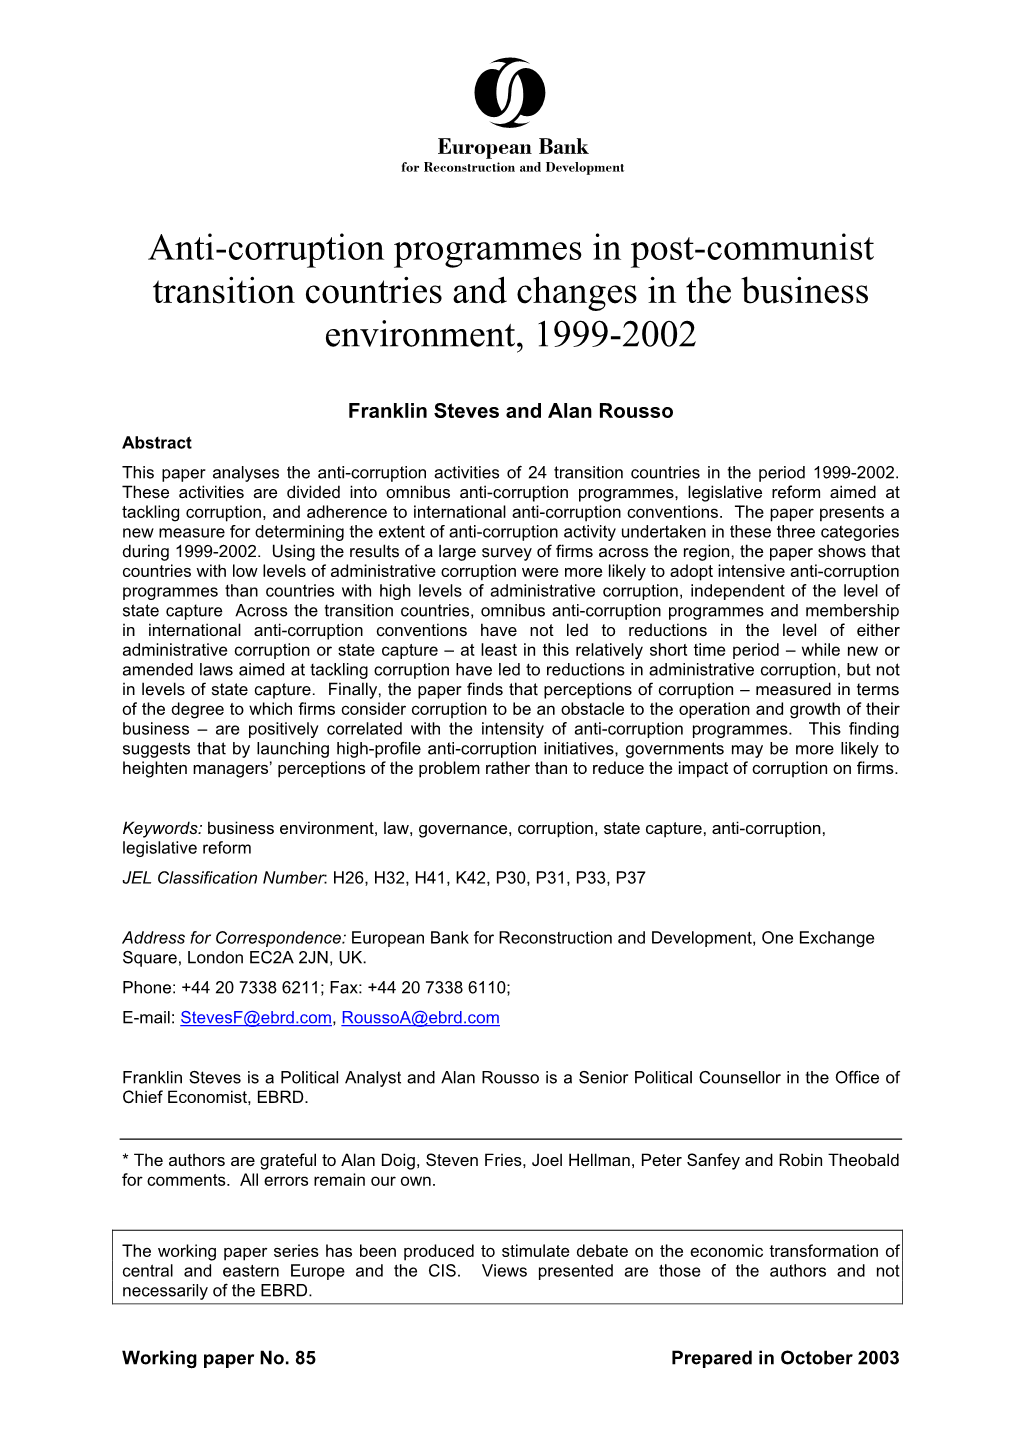 Anti-Corruption Programmes in Post-Communist Transition Countries and Changes in the Business Environment, 1999-2002